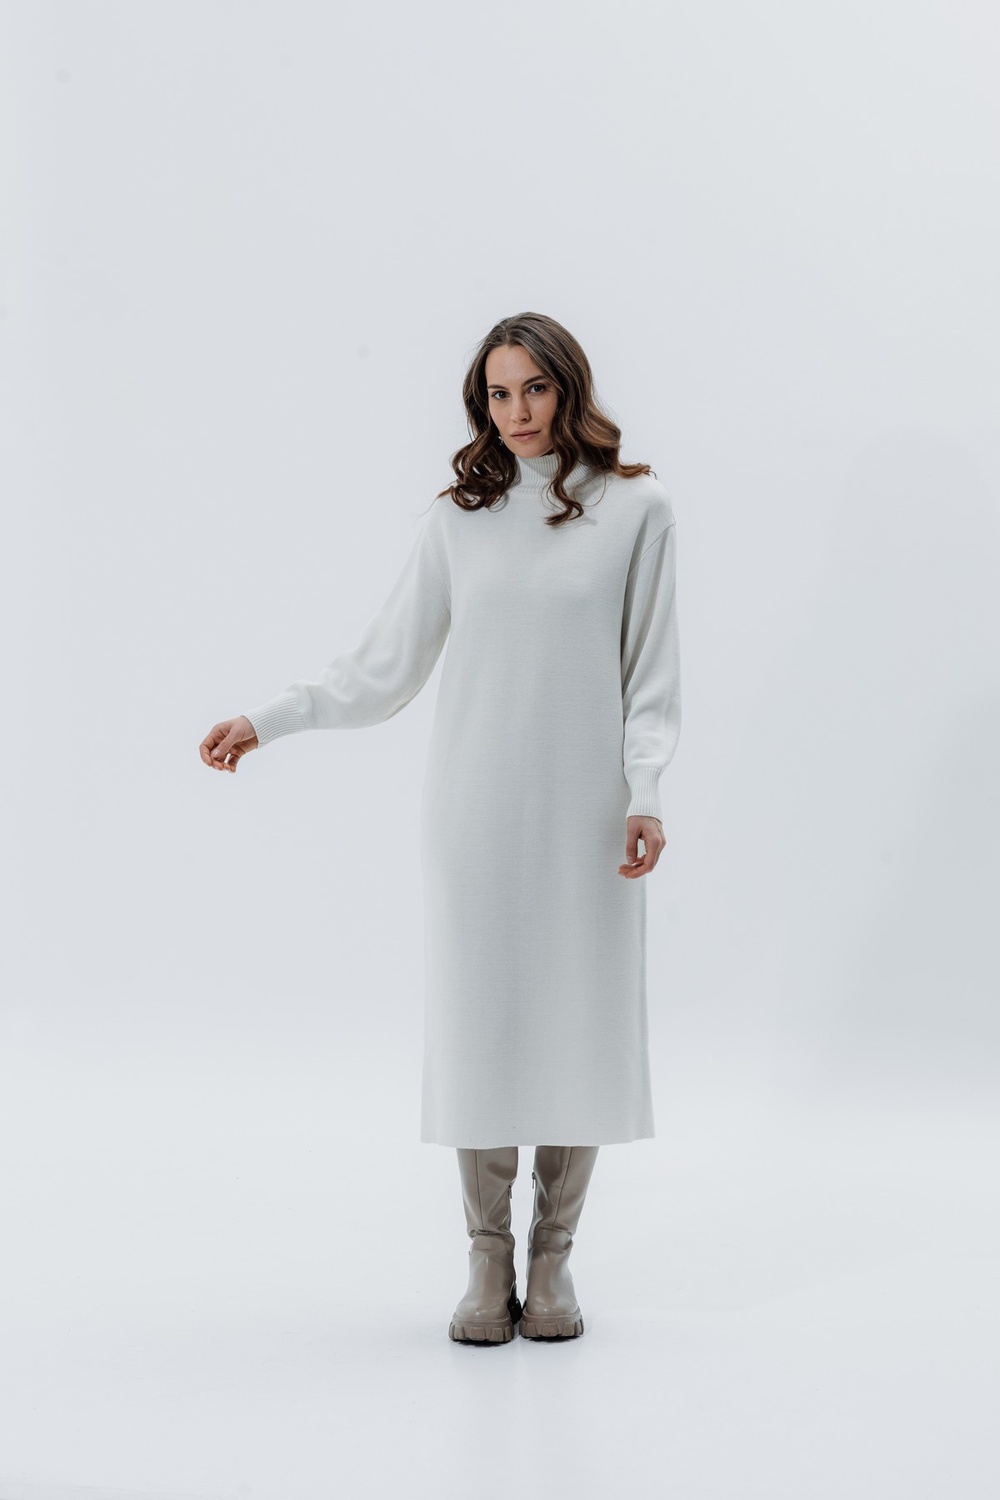 Dress knitted with a high neck from a merino wool